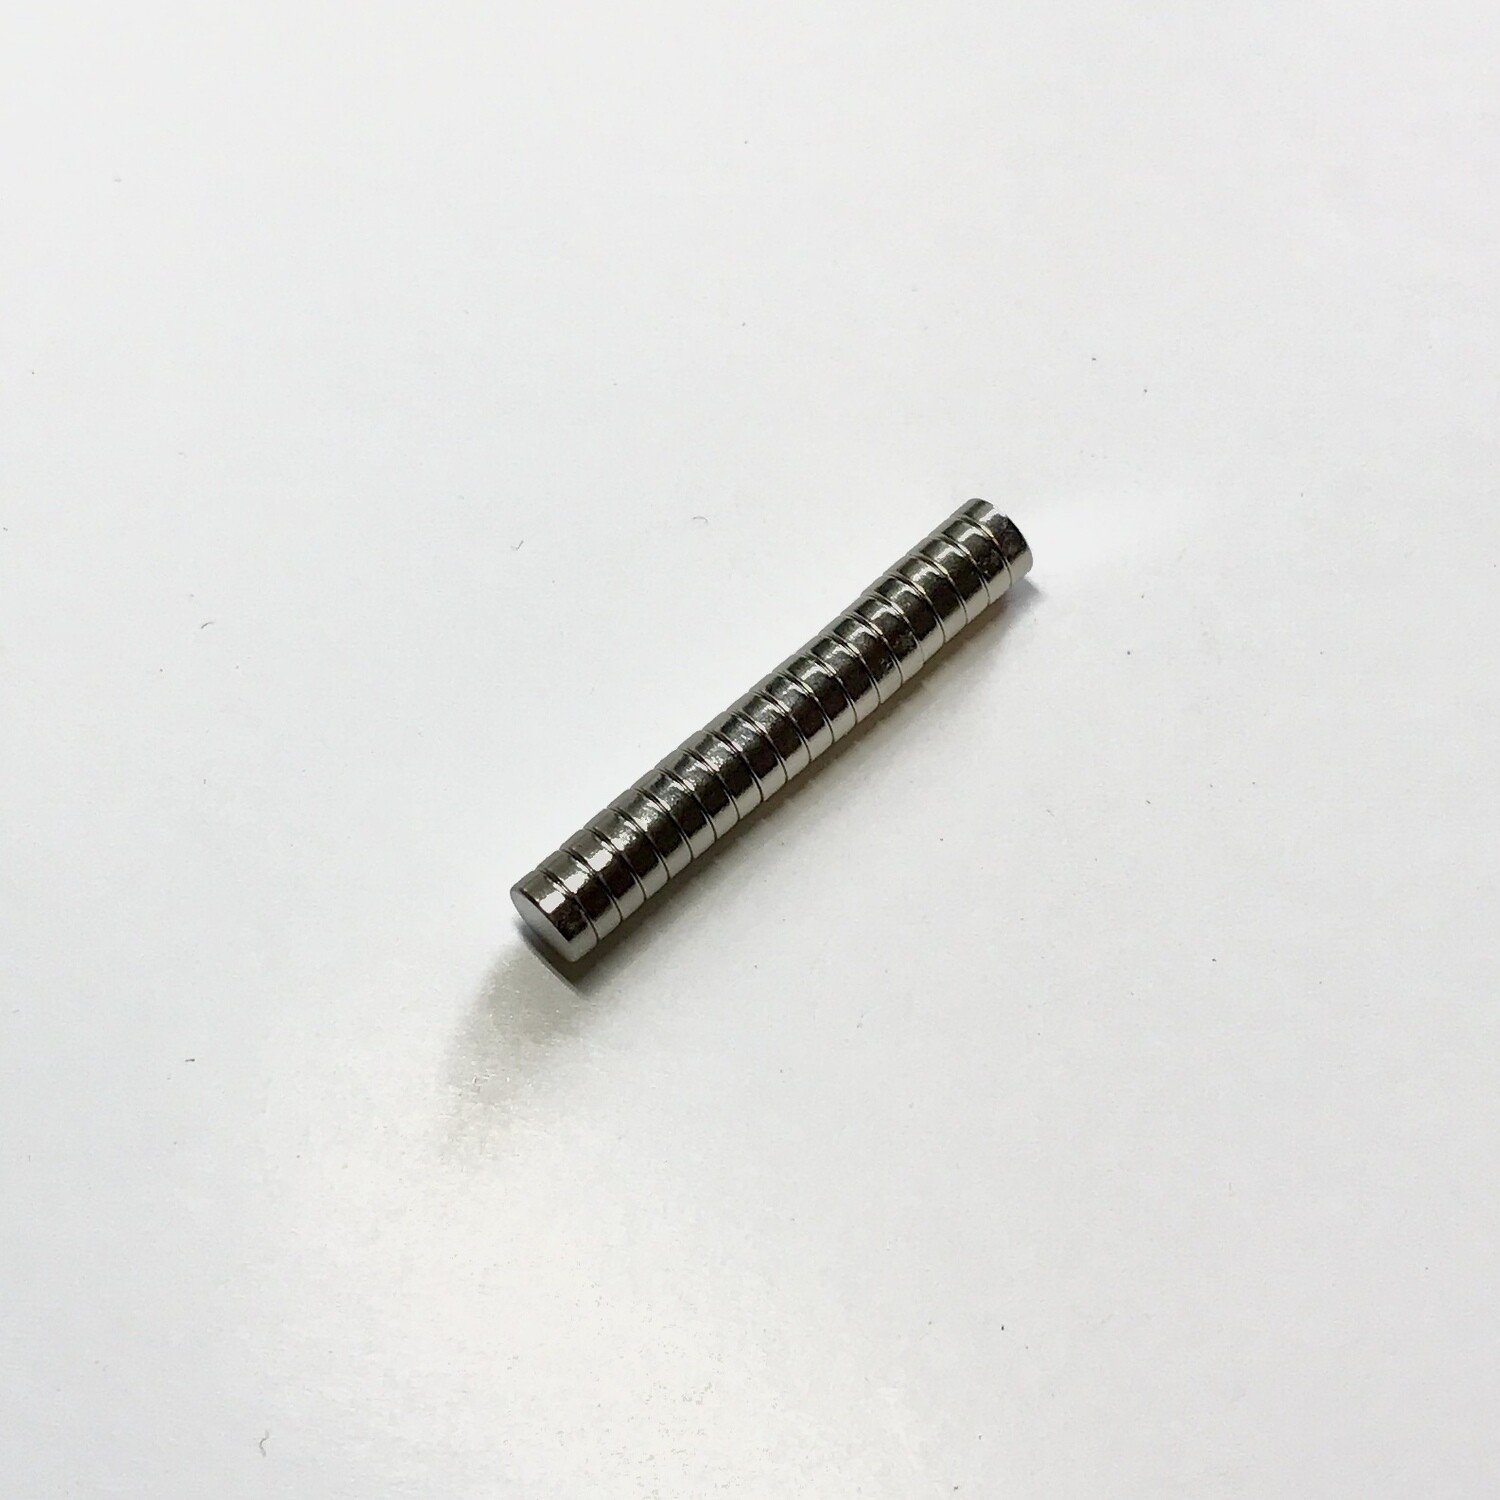 20 x 6mm by 2mm magnets